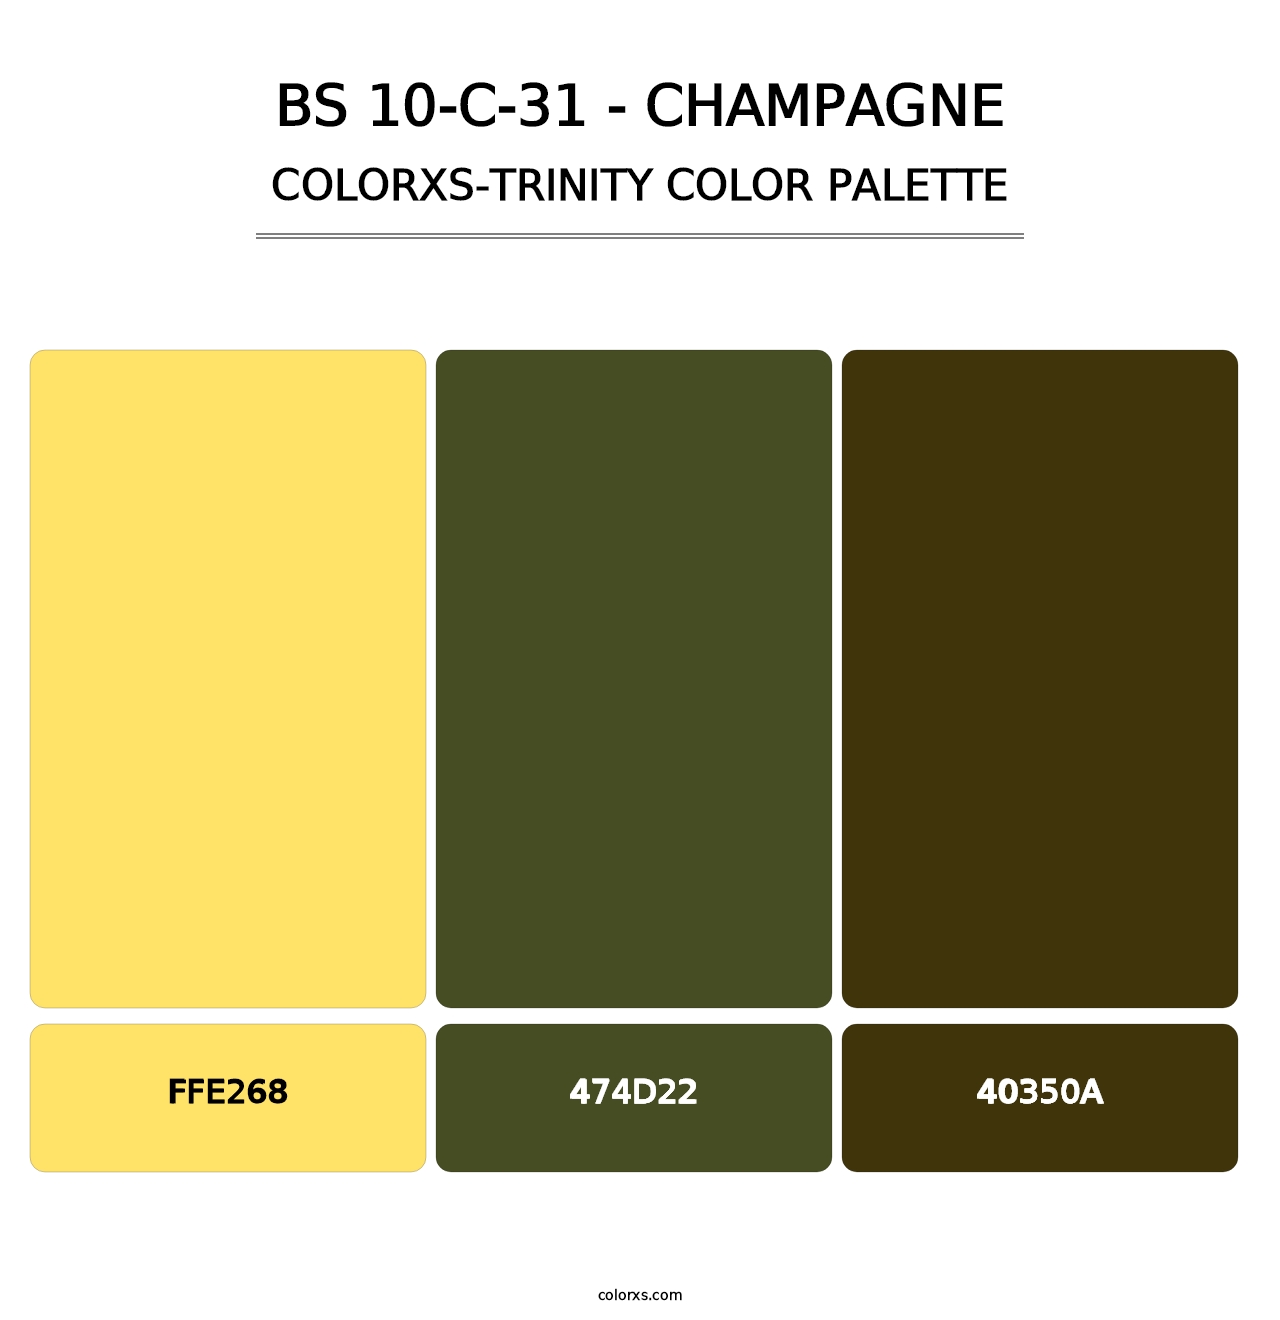 BS 10-C-31 - Champagne - Colorxs Trinity Palette